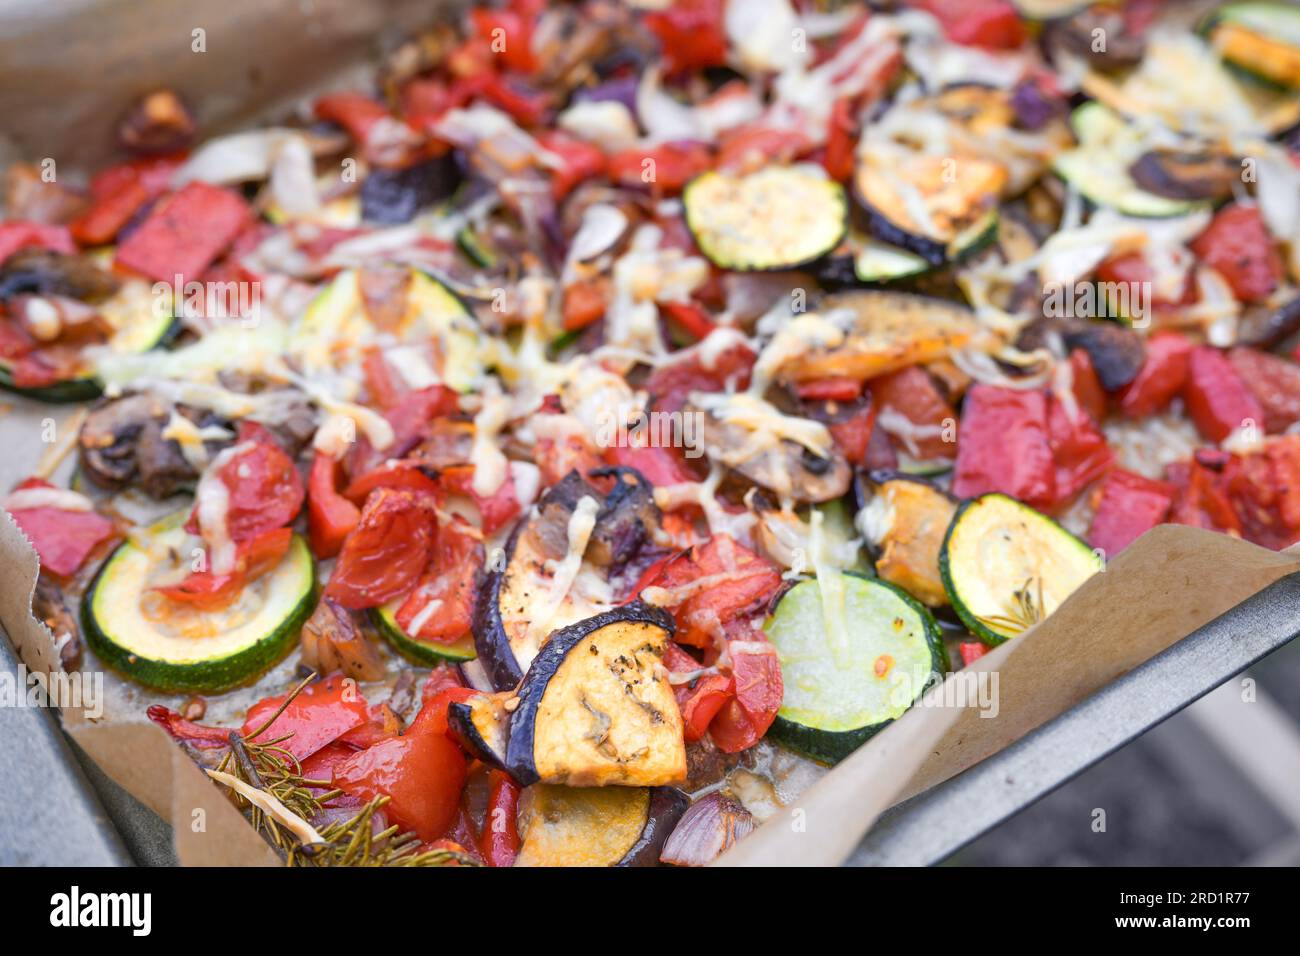 Oven-baked vegetables with eggplant, zucchini, bell pepper, onions and parmesan cheese on a baking tray, copy space, selected focus, narrow depth of f Stock Photo